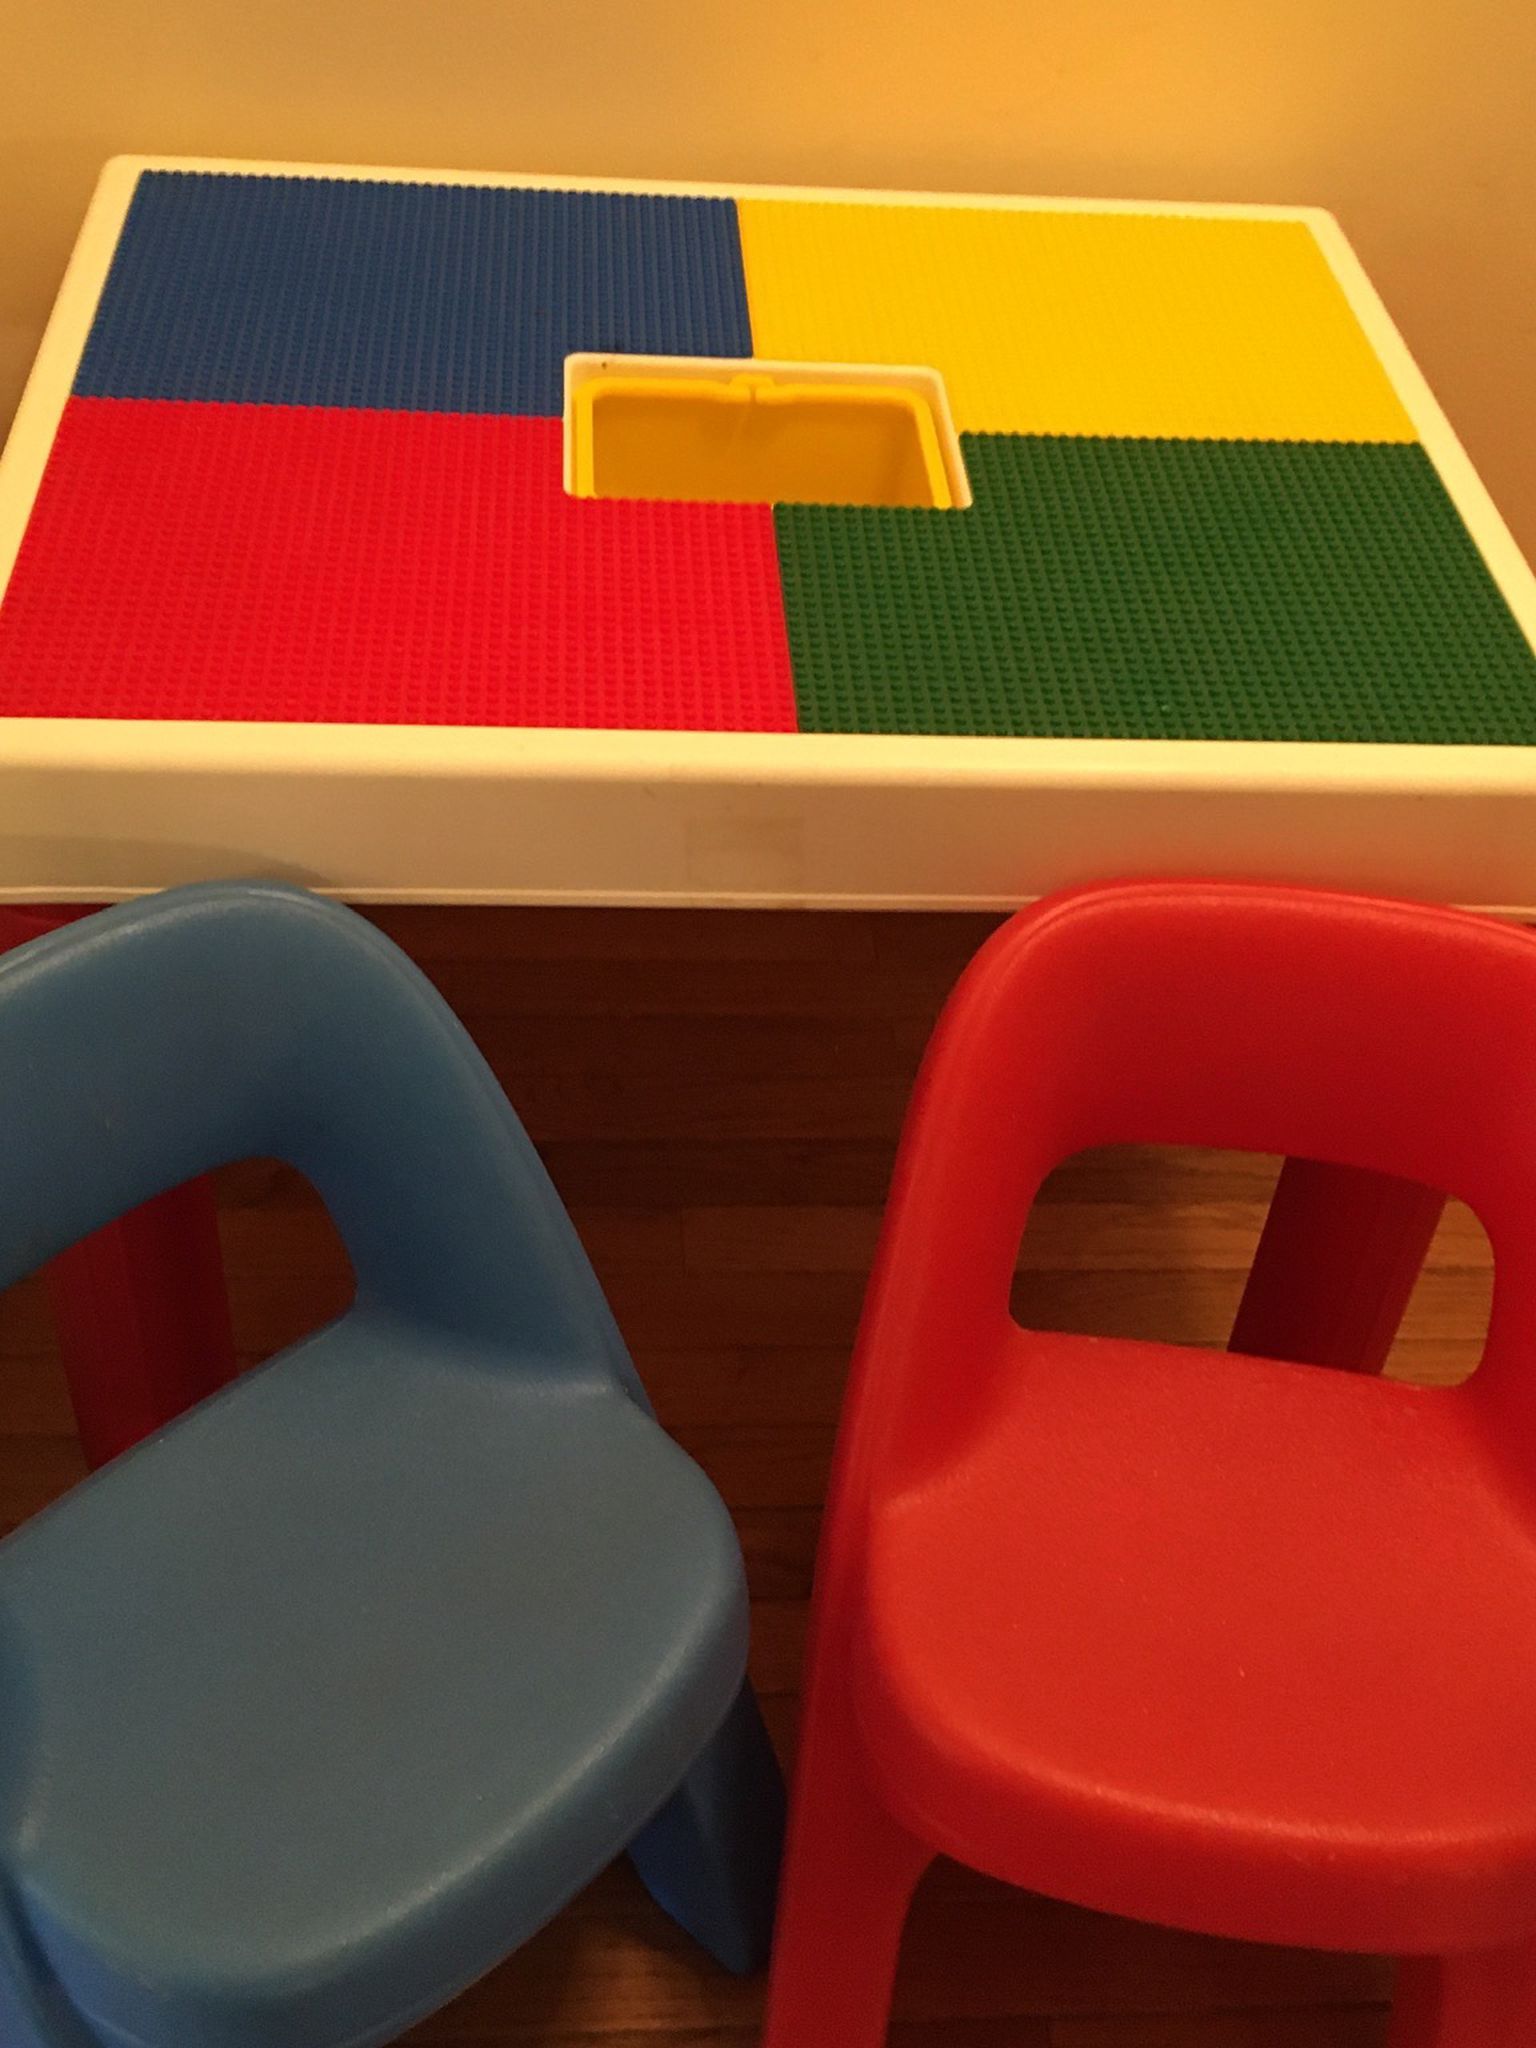 Kids Play Table For Lego Style Brick Toys